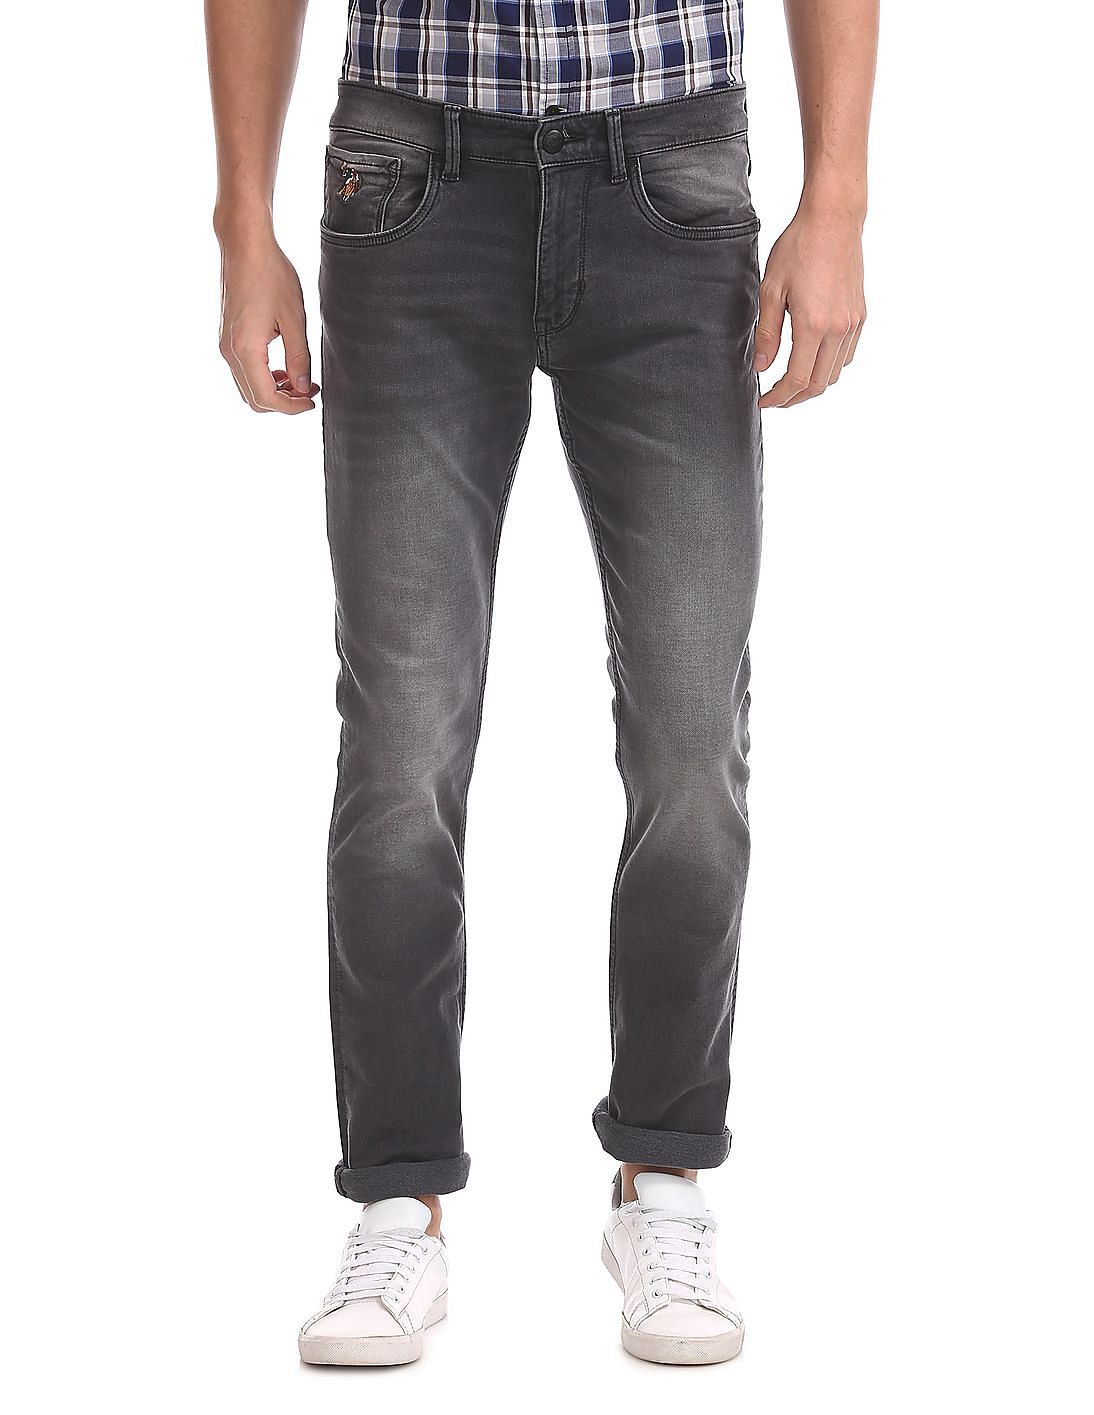 Buy Men Slim Straight Fit Stone Wash Jeans online at NNNOW.com